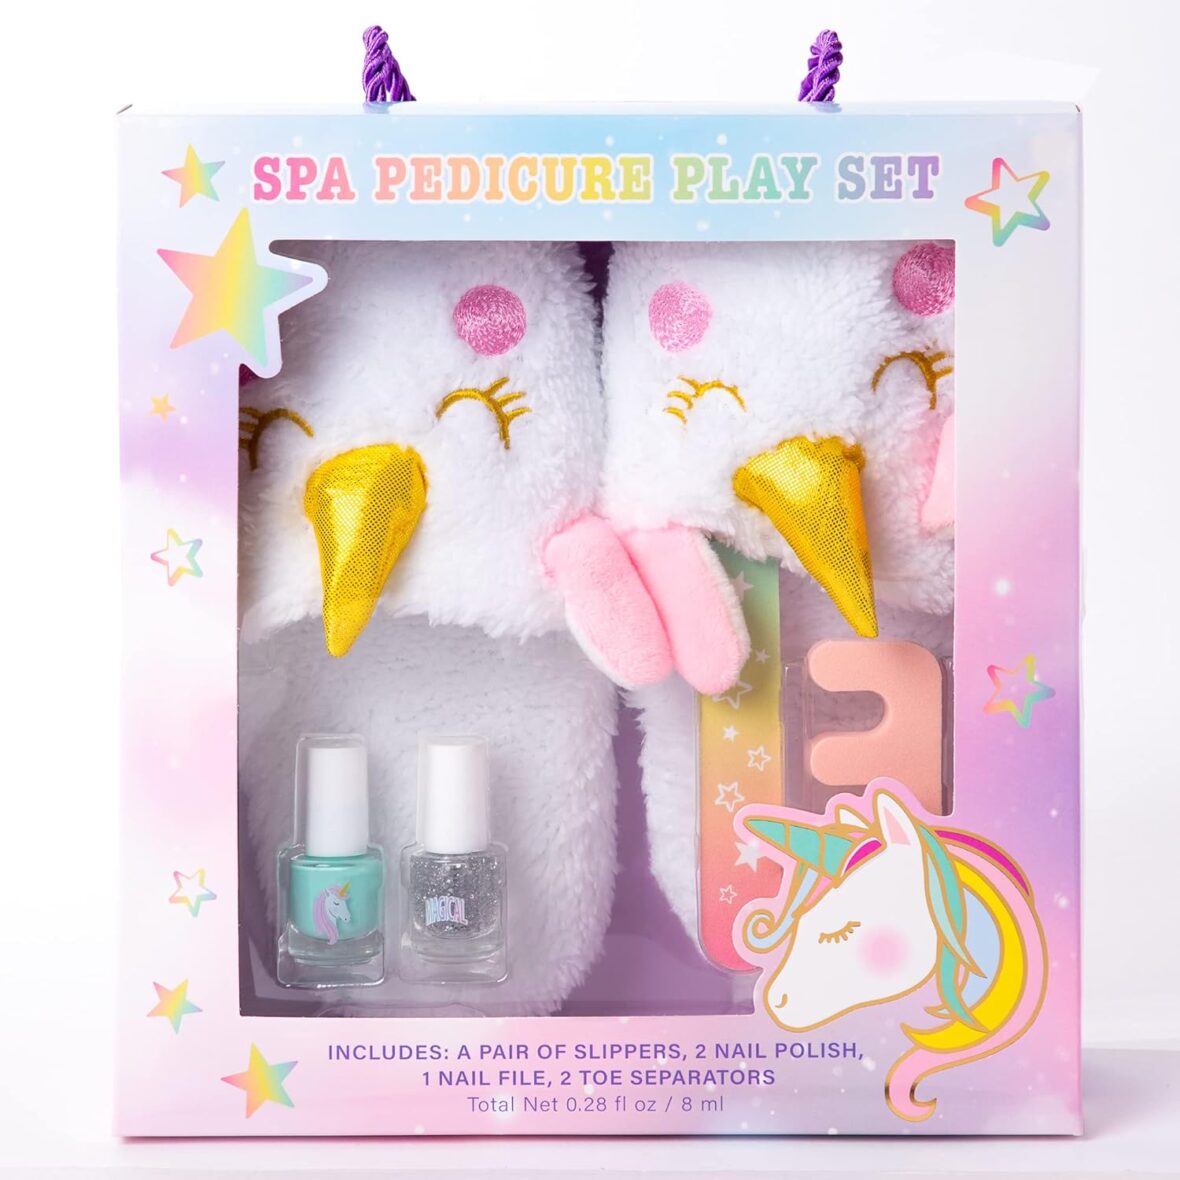 So Magical Unicorn Foot Spa Gift Set – Shower and Spa Play Set for Teens and Girls – Includes Super Plush Slippers, Toe Separator & Nail File